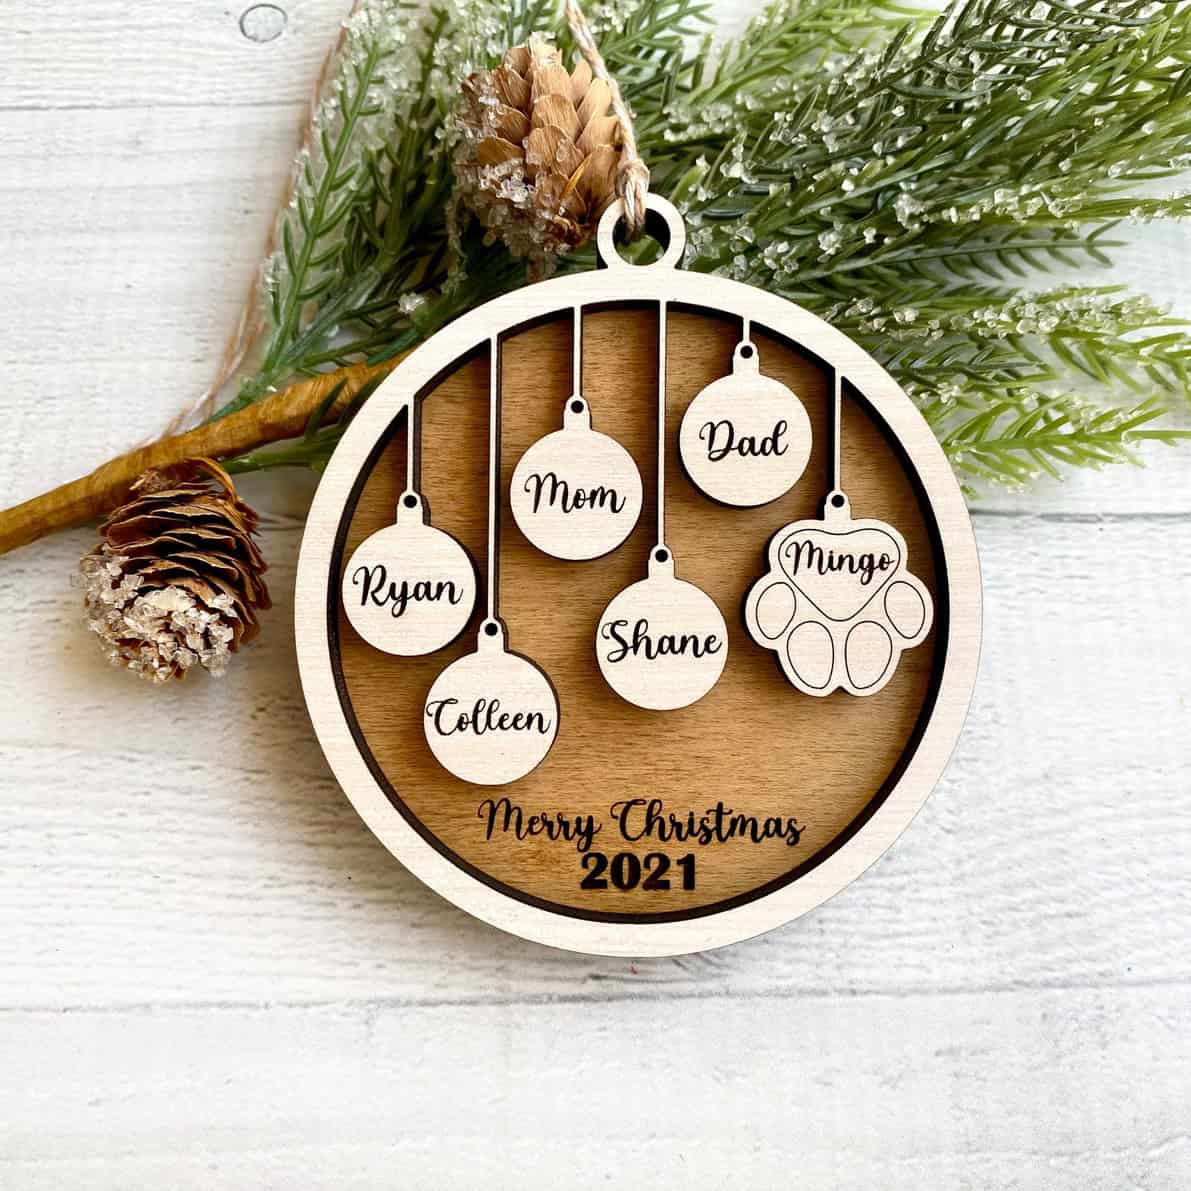 Let's Make Memories Personalized Couples First Christmas Round Ornament Customize Message Christmas Ornament Year 